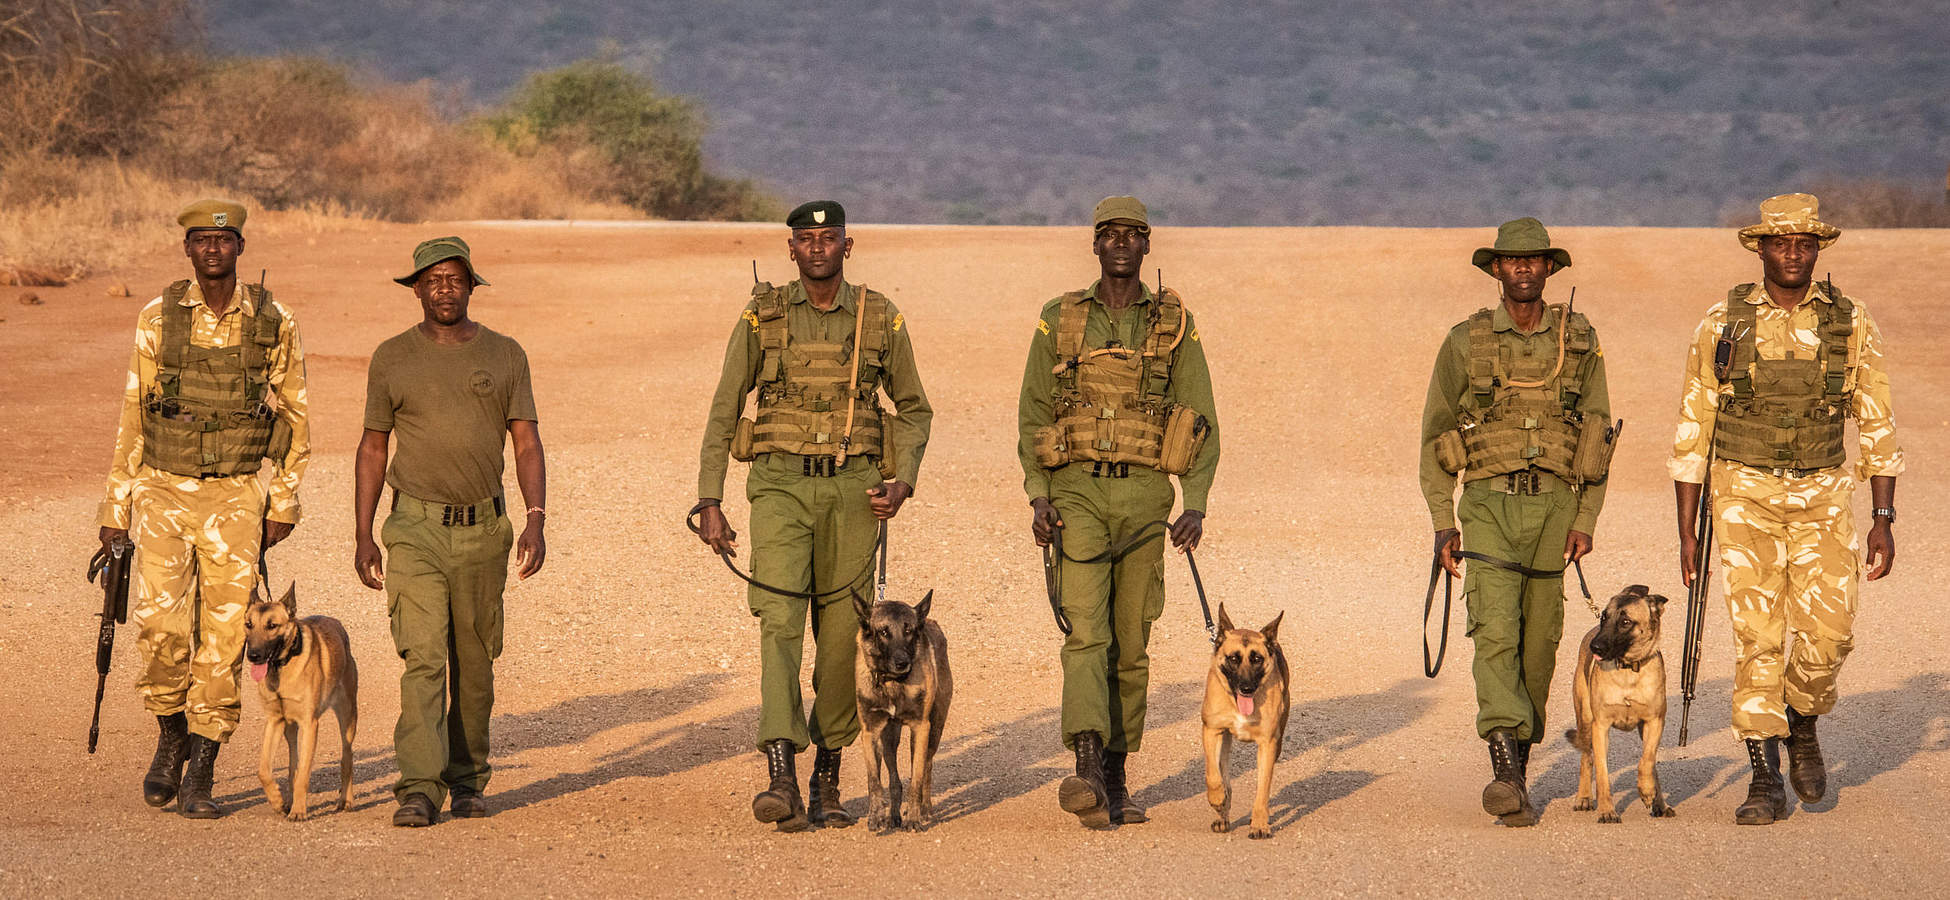 Dogs of dswt